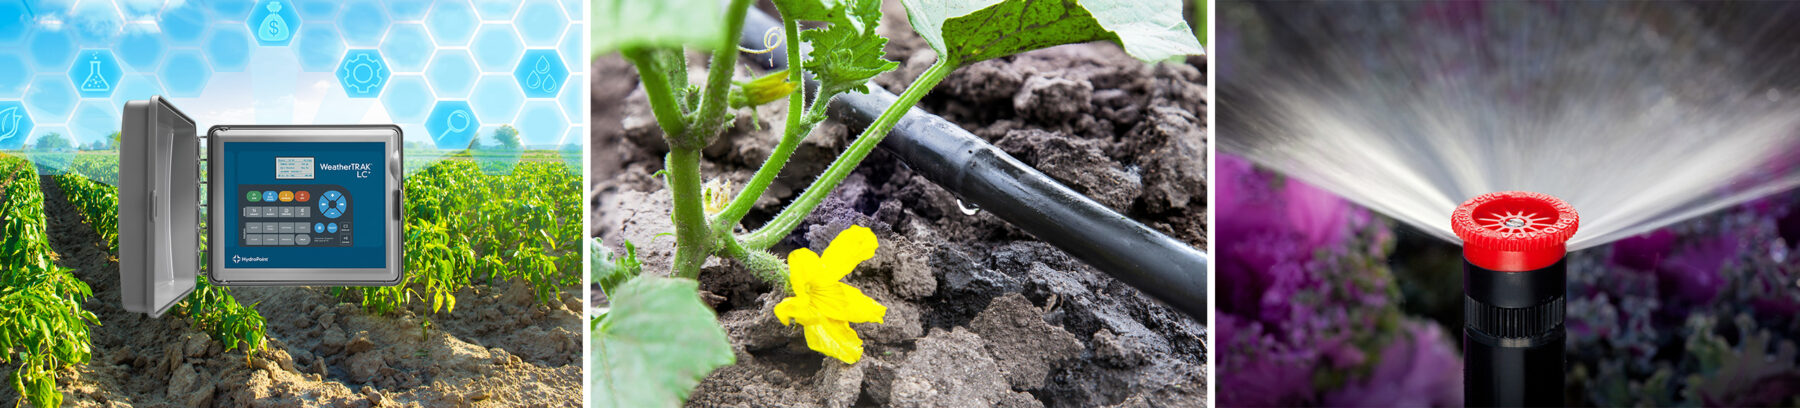 Technologies to promote for Smart Irrigation Month - July blog post